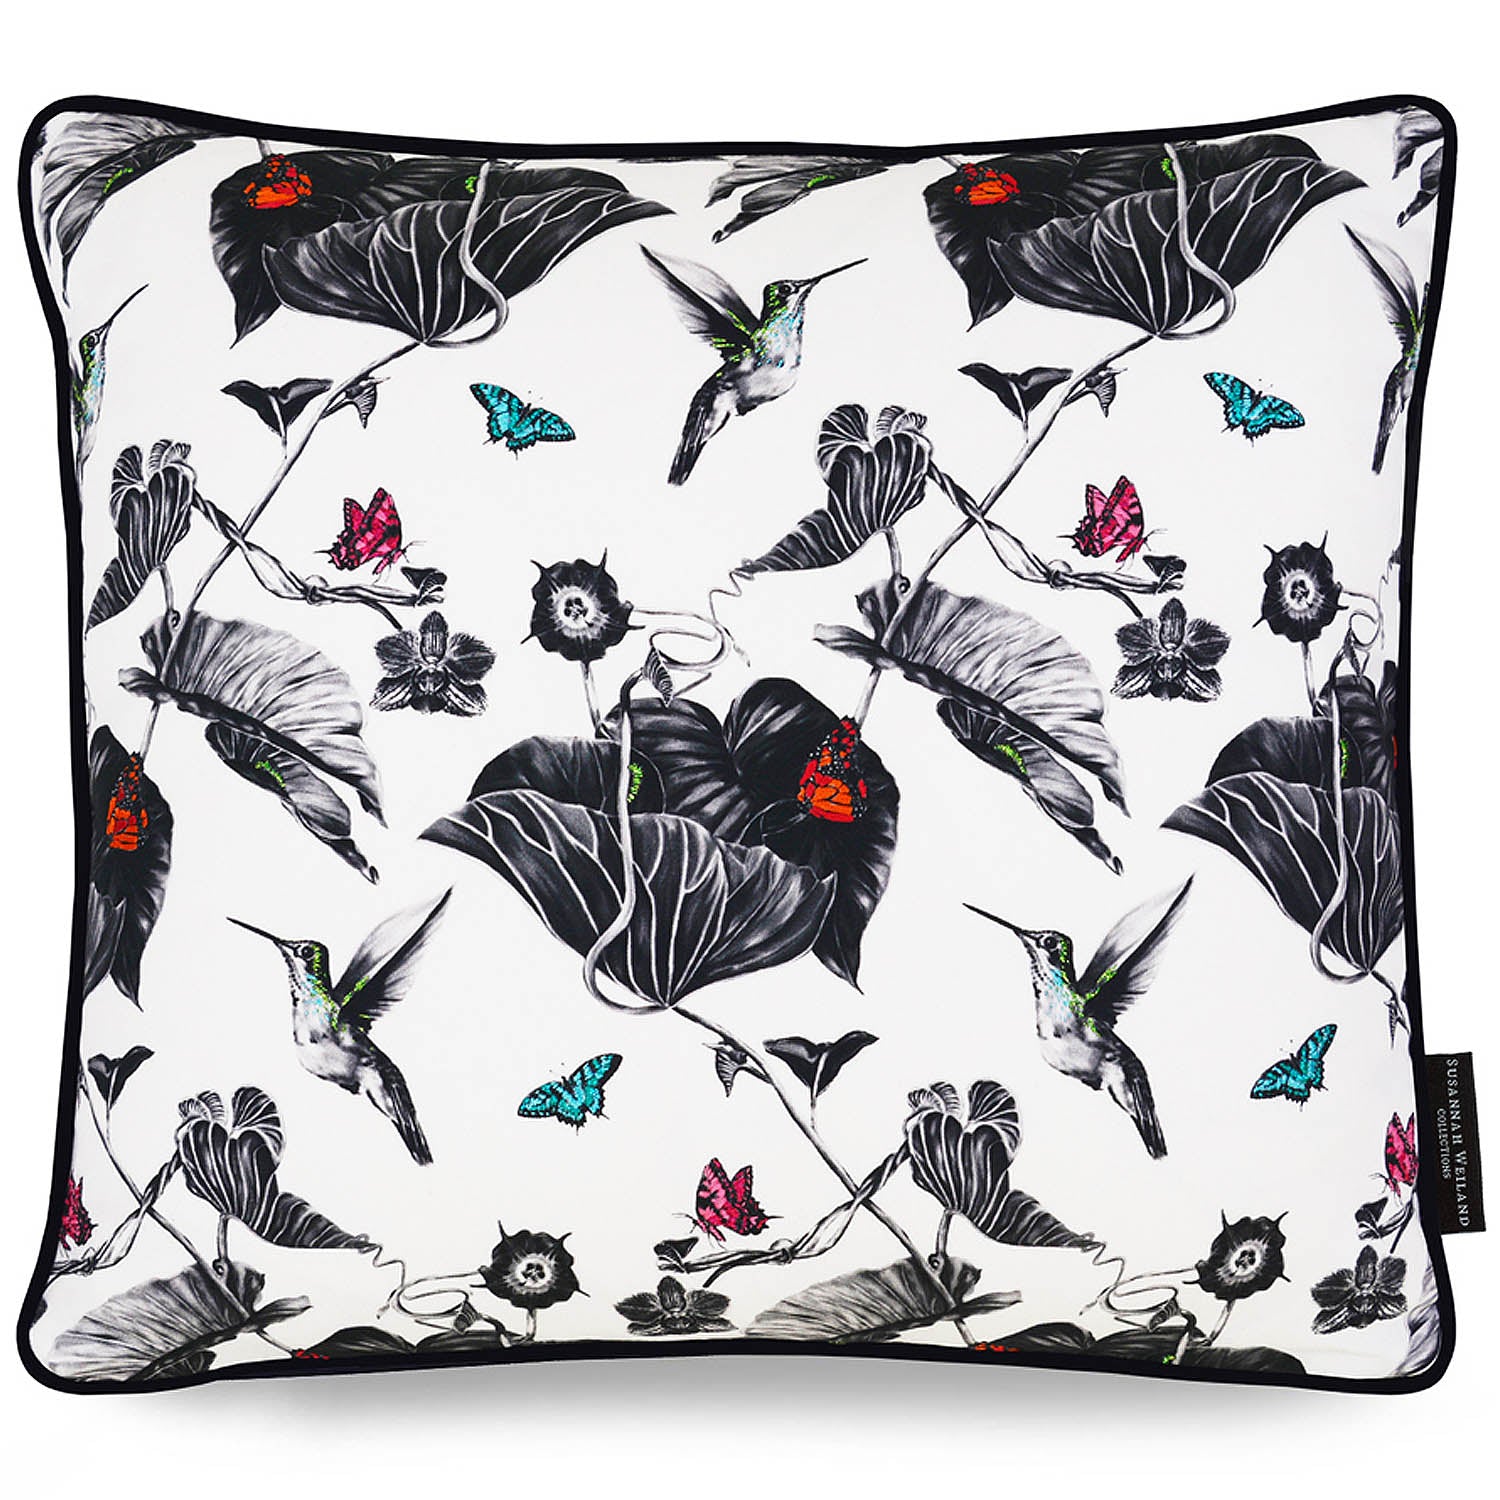 Cushion with Hummingbirds print and hand embroidered detail